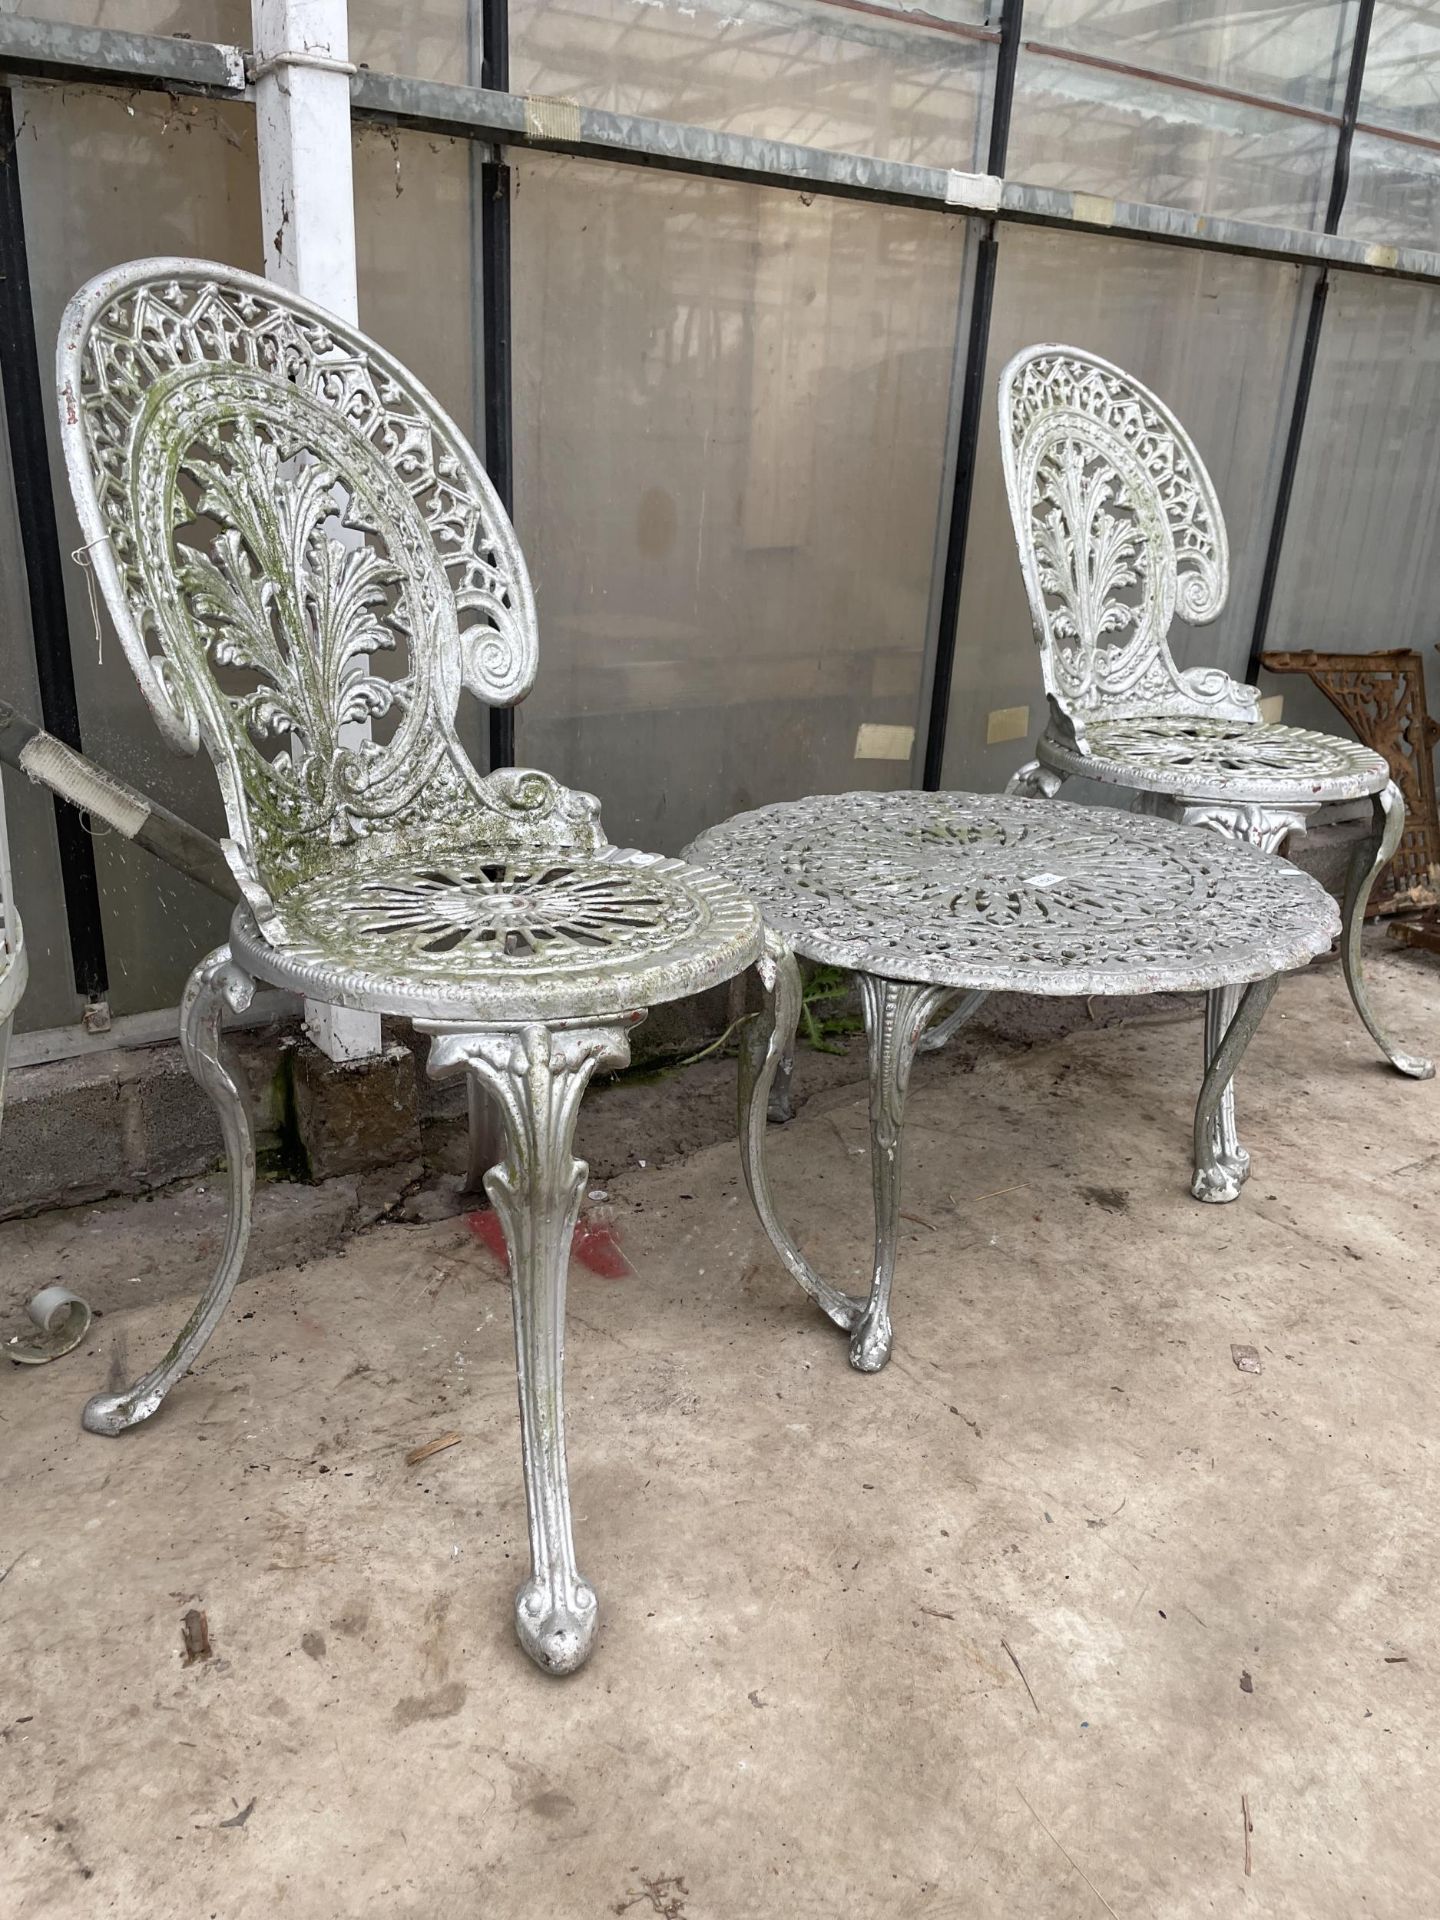 A CAST ALLOY PATIO SET COMPRISING OF TWO CHAIRS AND A ROUND COFFEE TABLE - Image 2 of 4